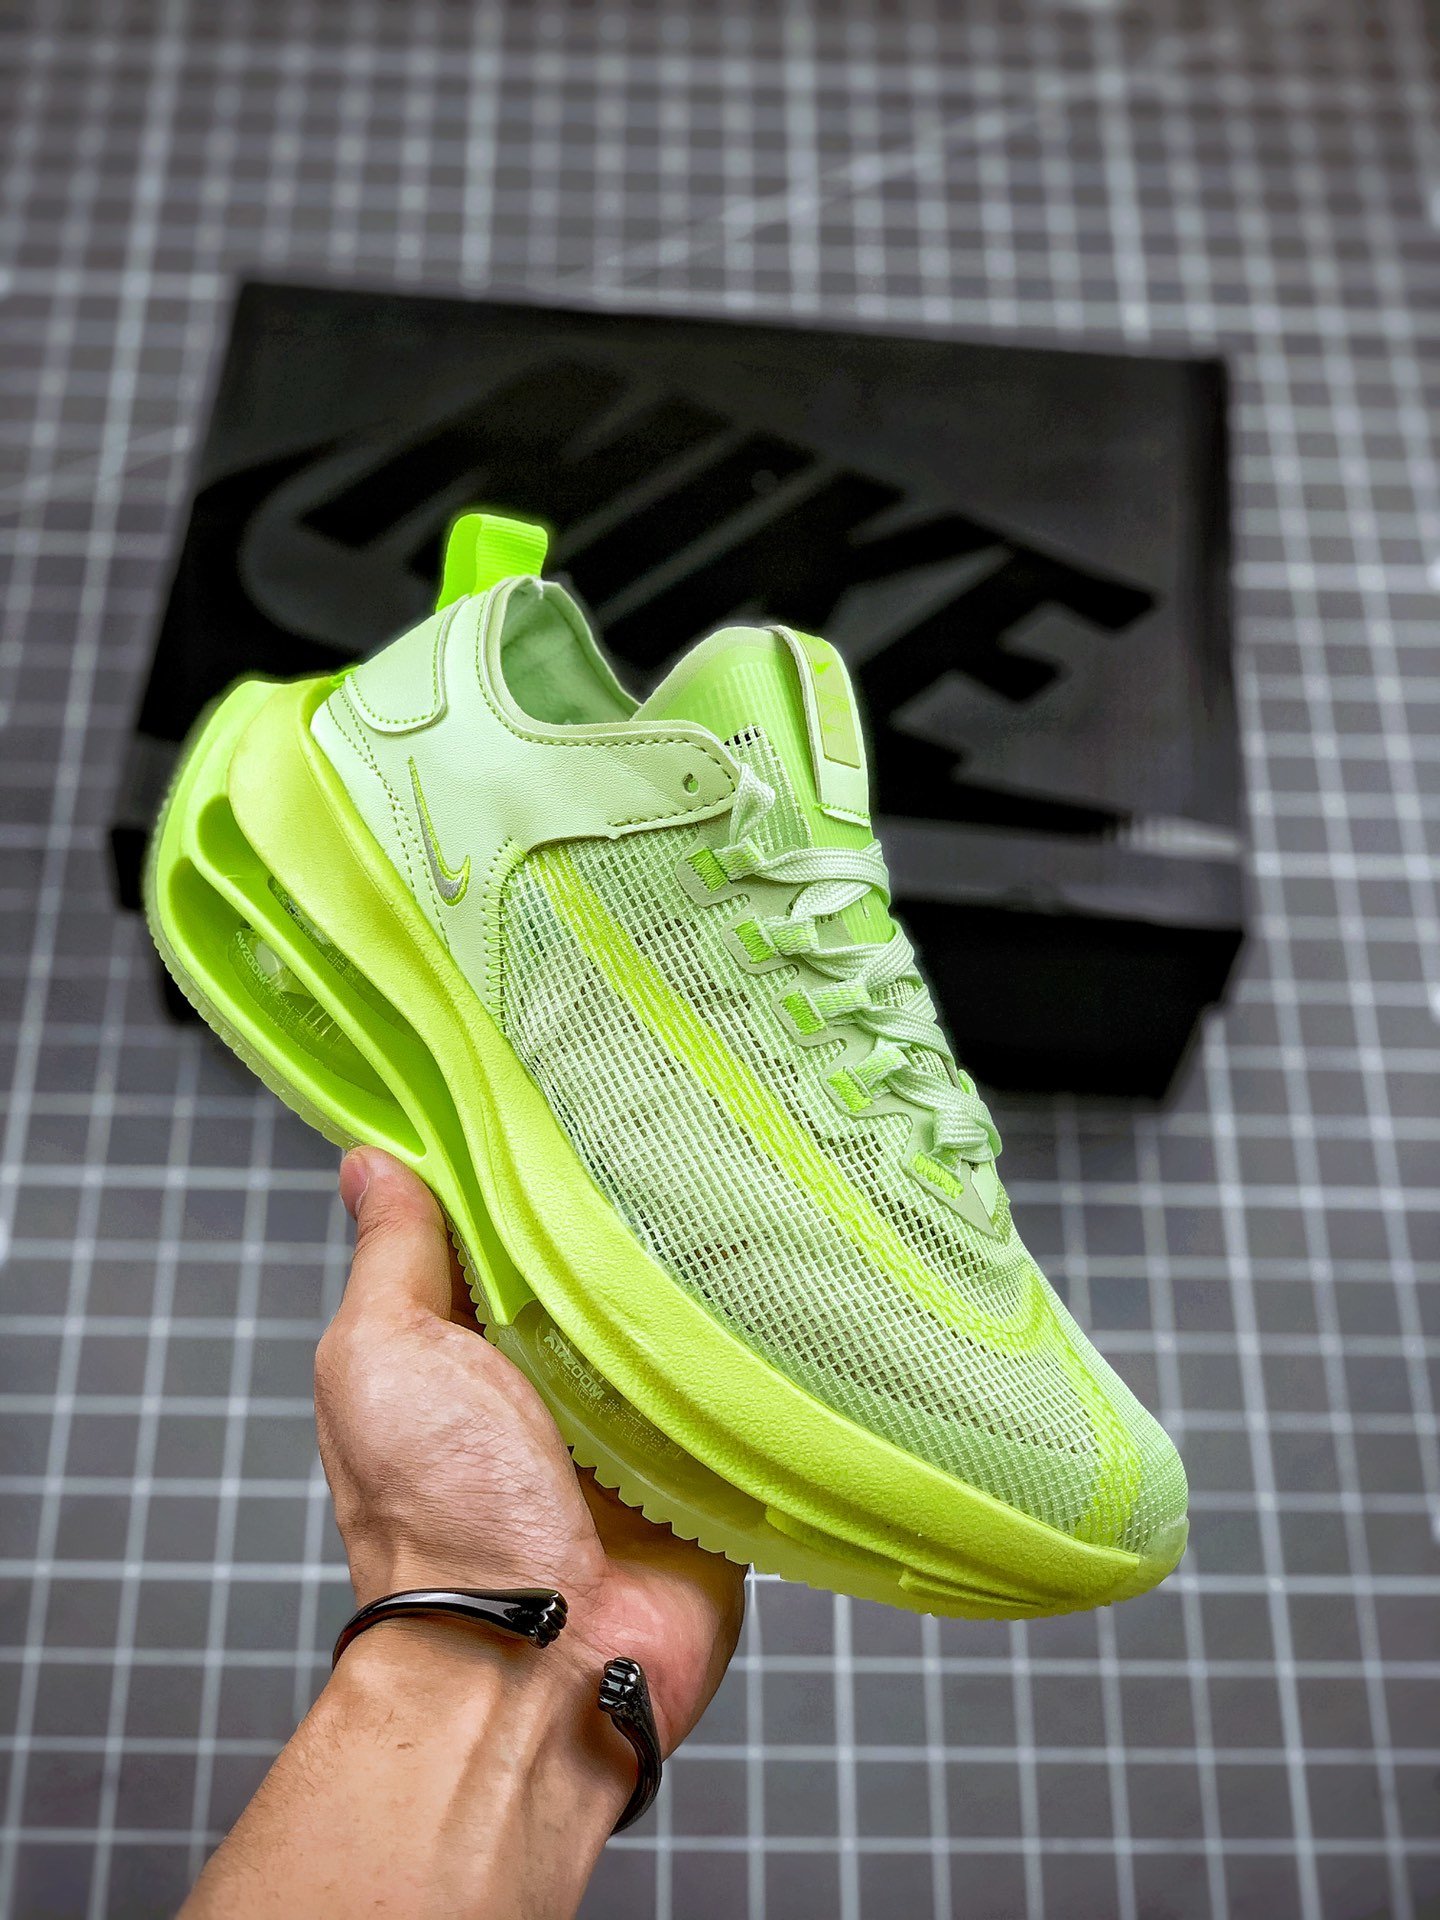 Nike Zoom Double Stacked "Barely Volt" CI0804-700 Shoes